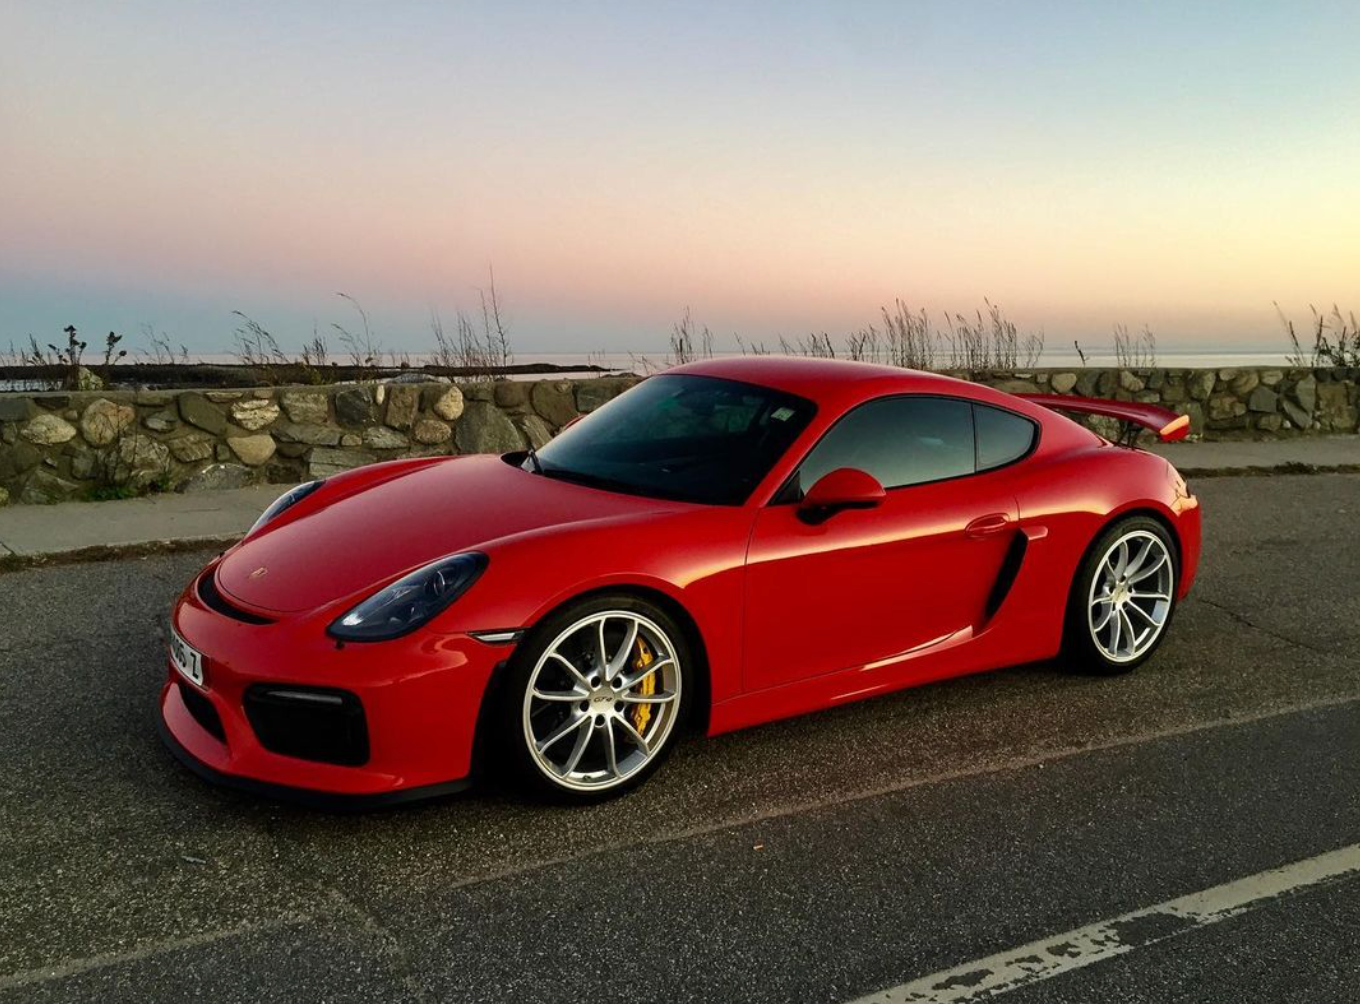 2016 Porsche Cayman GT4 - 2016 GT4 DeMan 4.5L Single Owner For Sale - Used - VIN WP0AC2A8XGK192490 - 26,500 Miles - 6 cyl - 2WD - Manual - Coupe - Red - North Hampton, NH 03862, United States